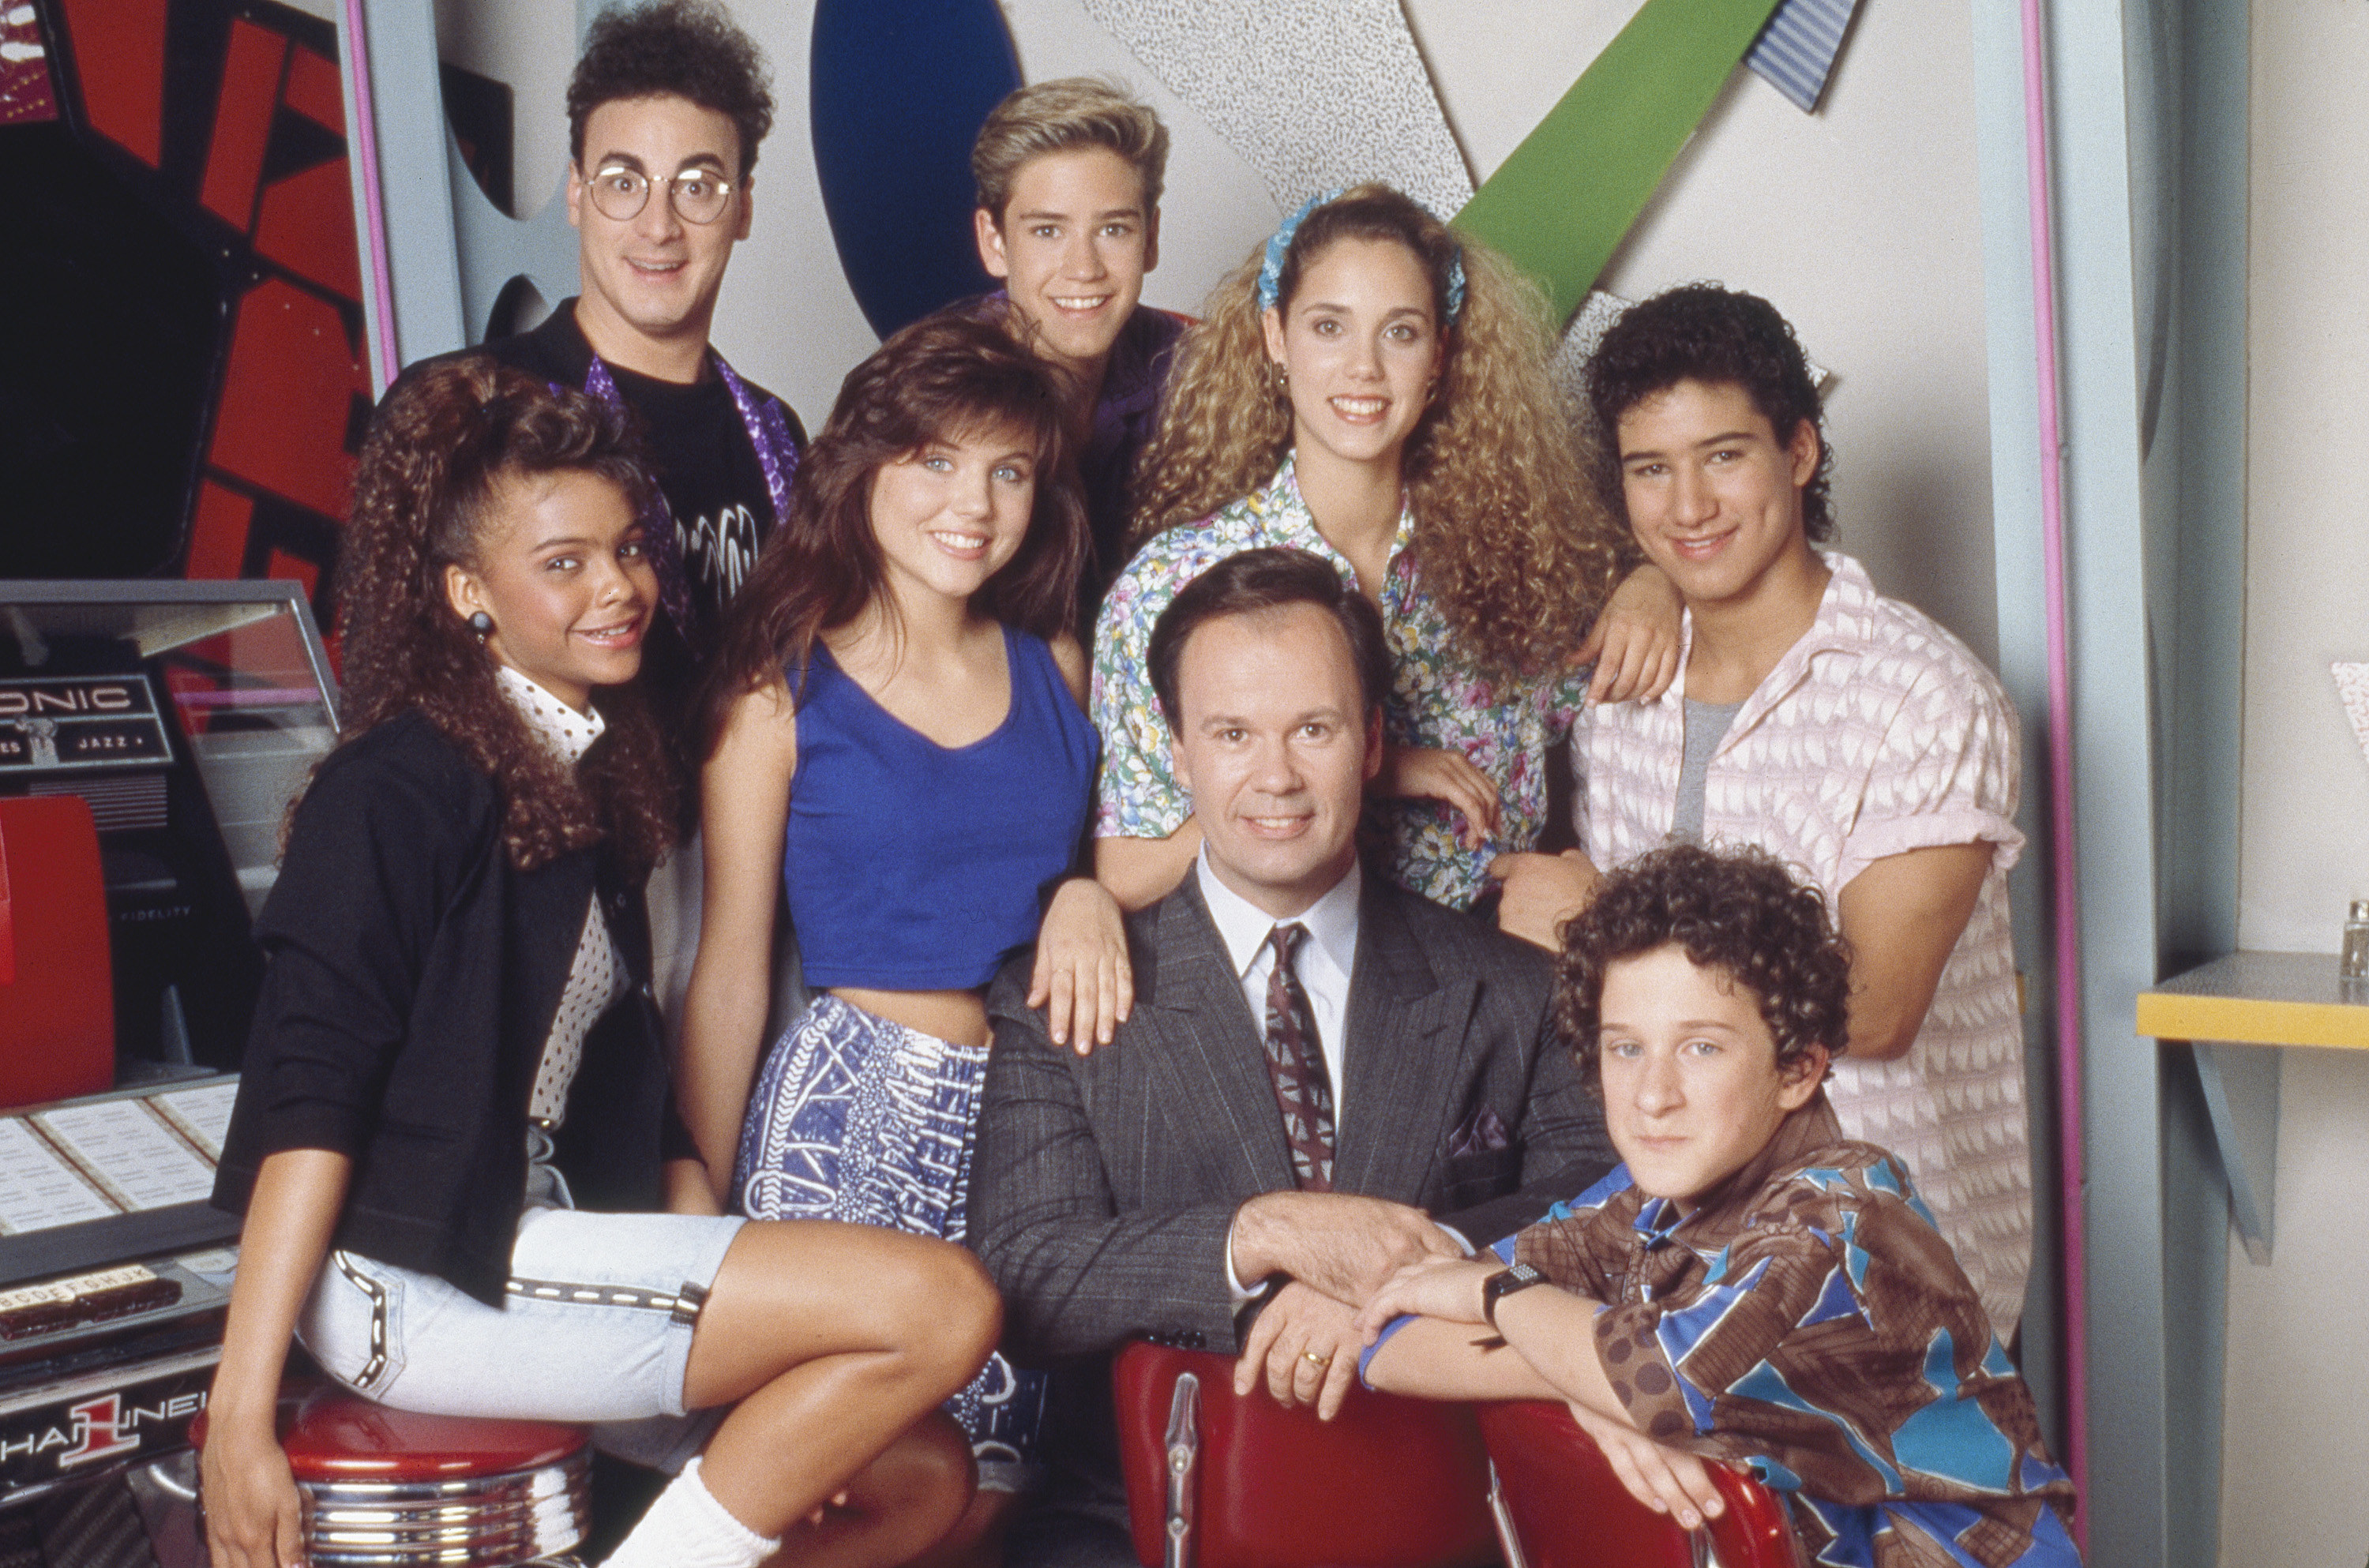 A cast photo from Saved by the Bell taken on The Max set.